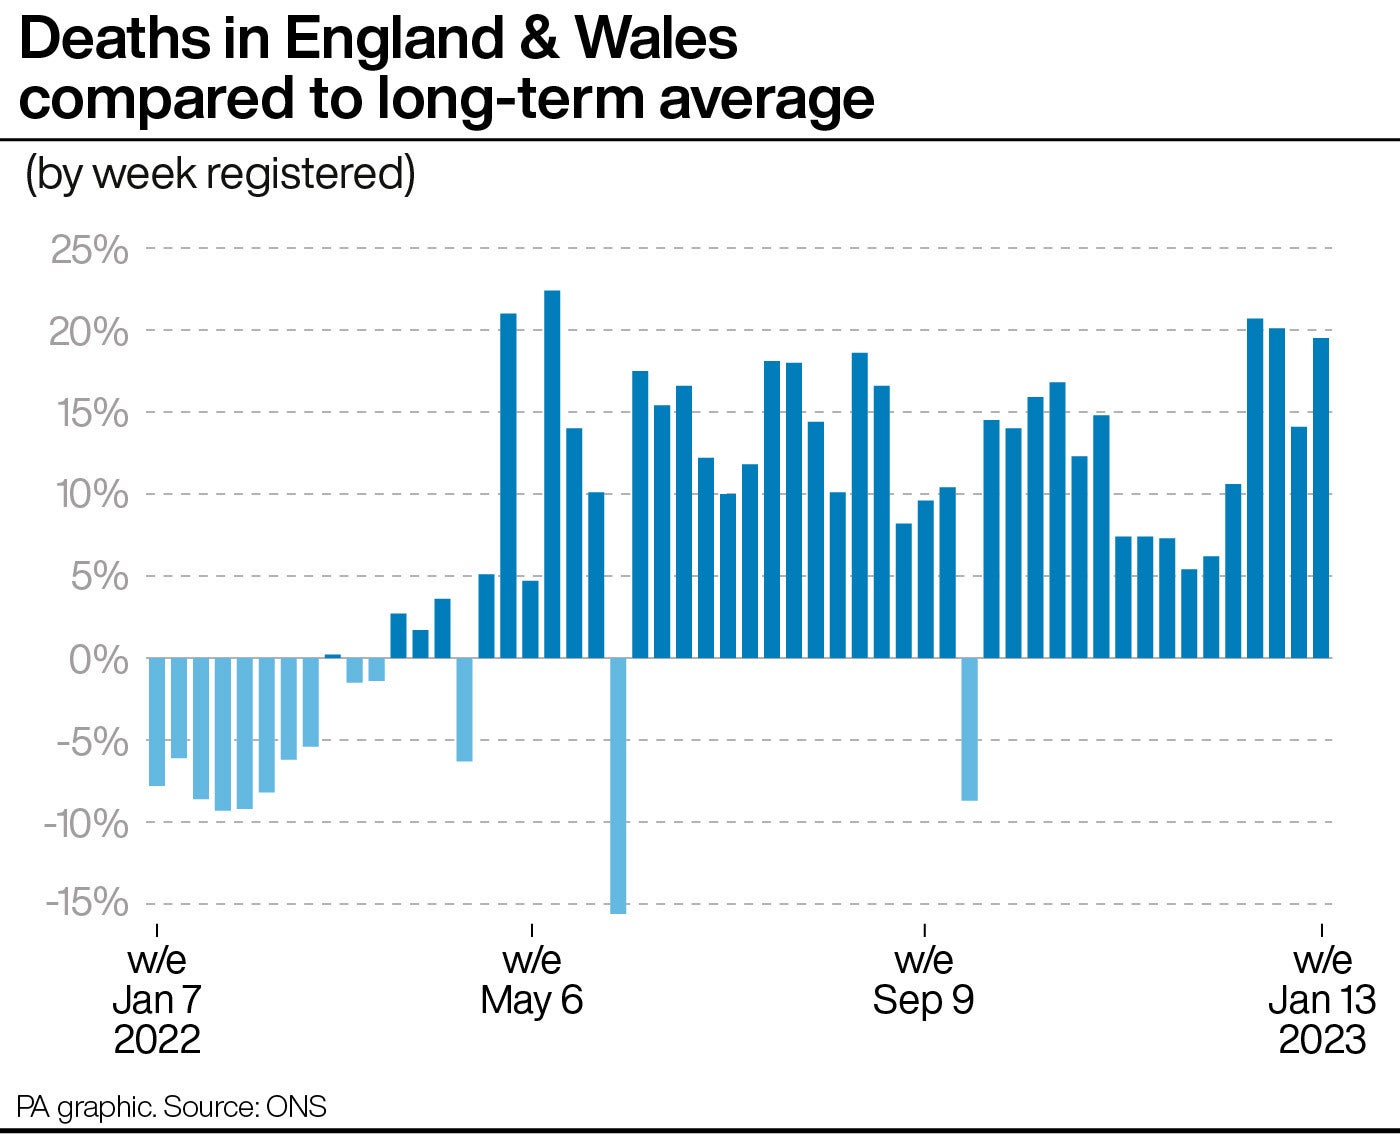 Deaths in England & Wales compared to long-term average